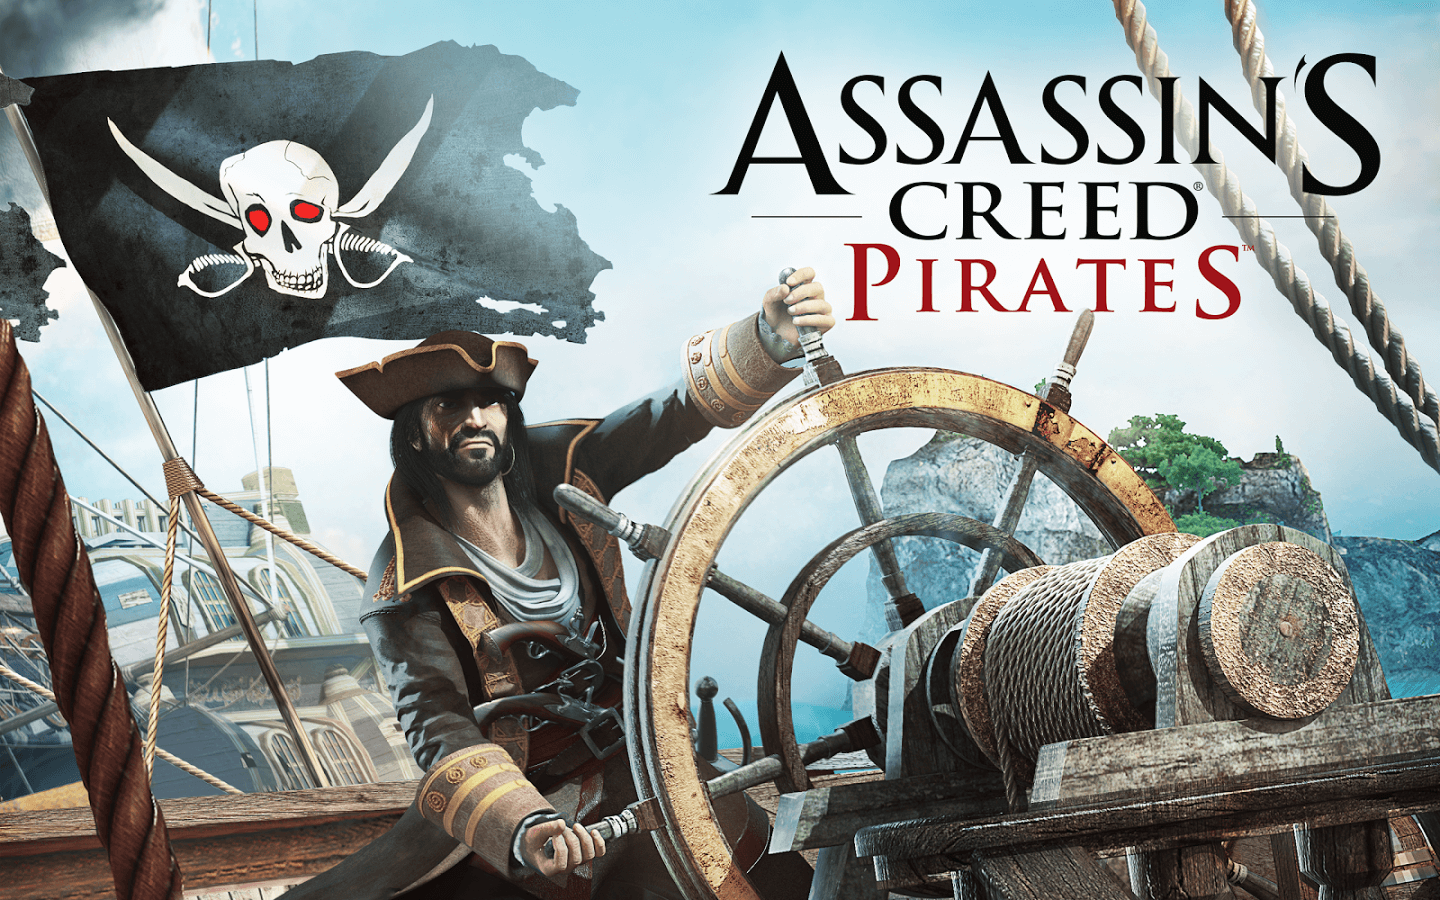 Assassin's Creed Pirates or